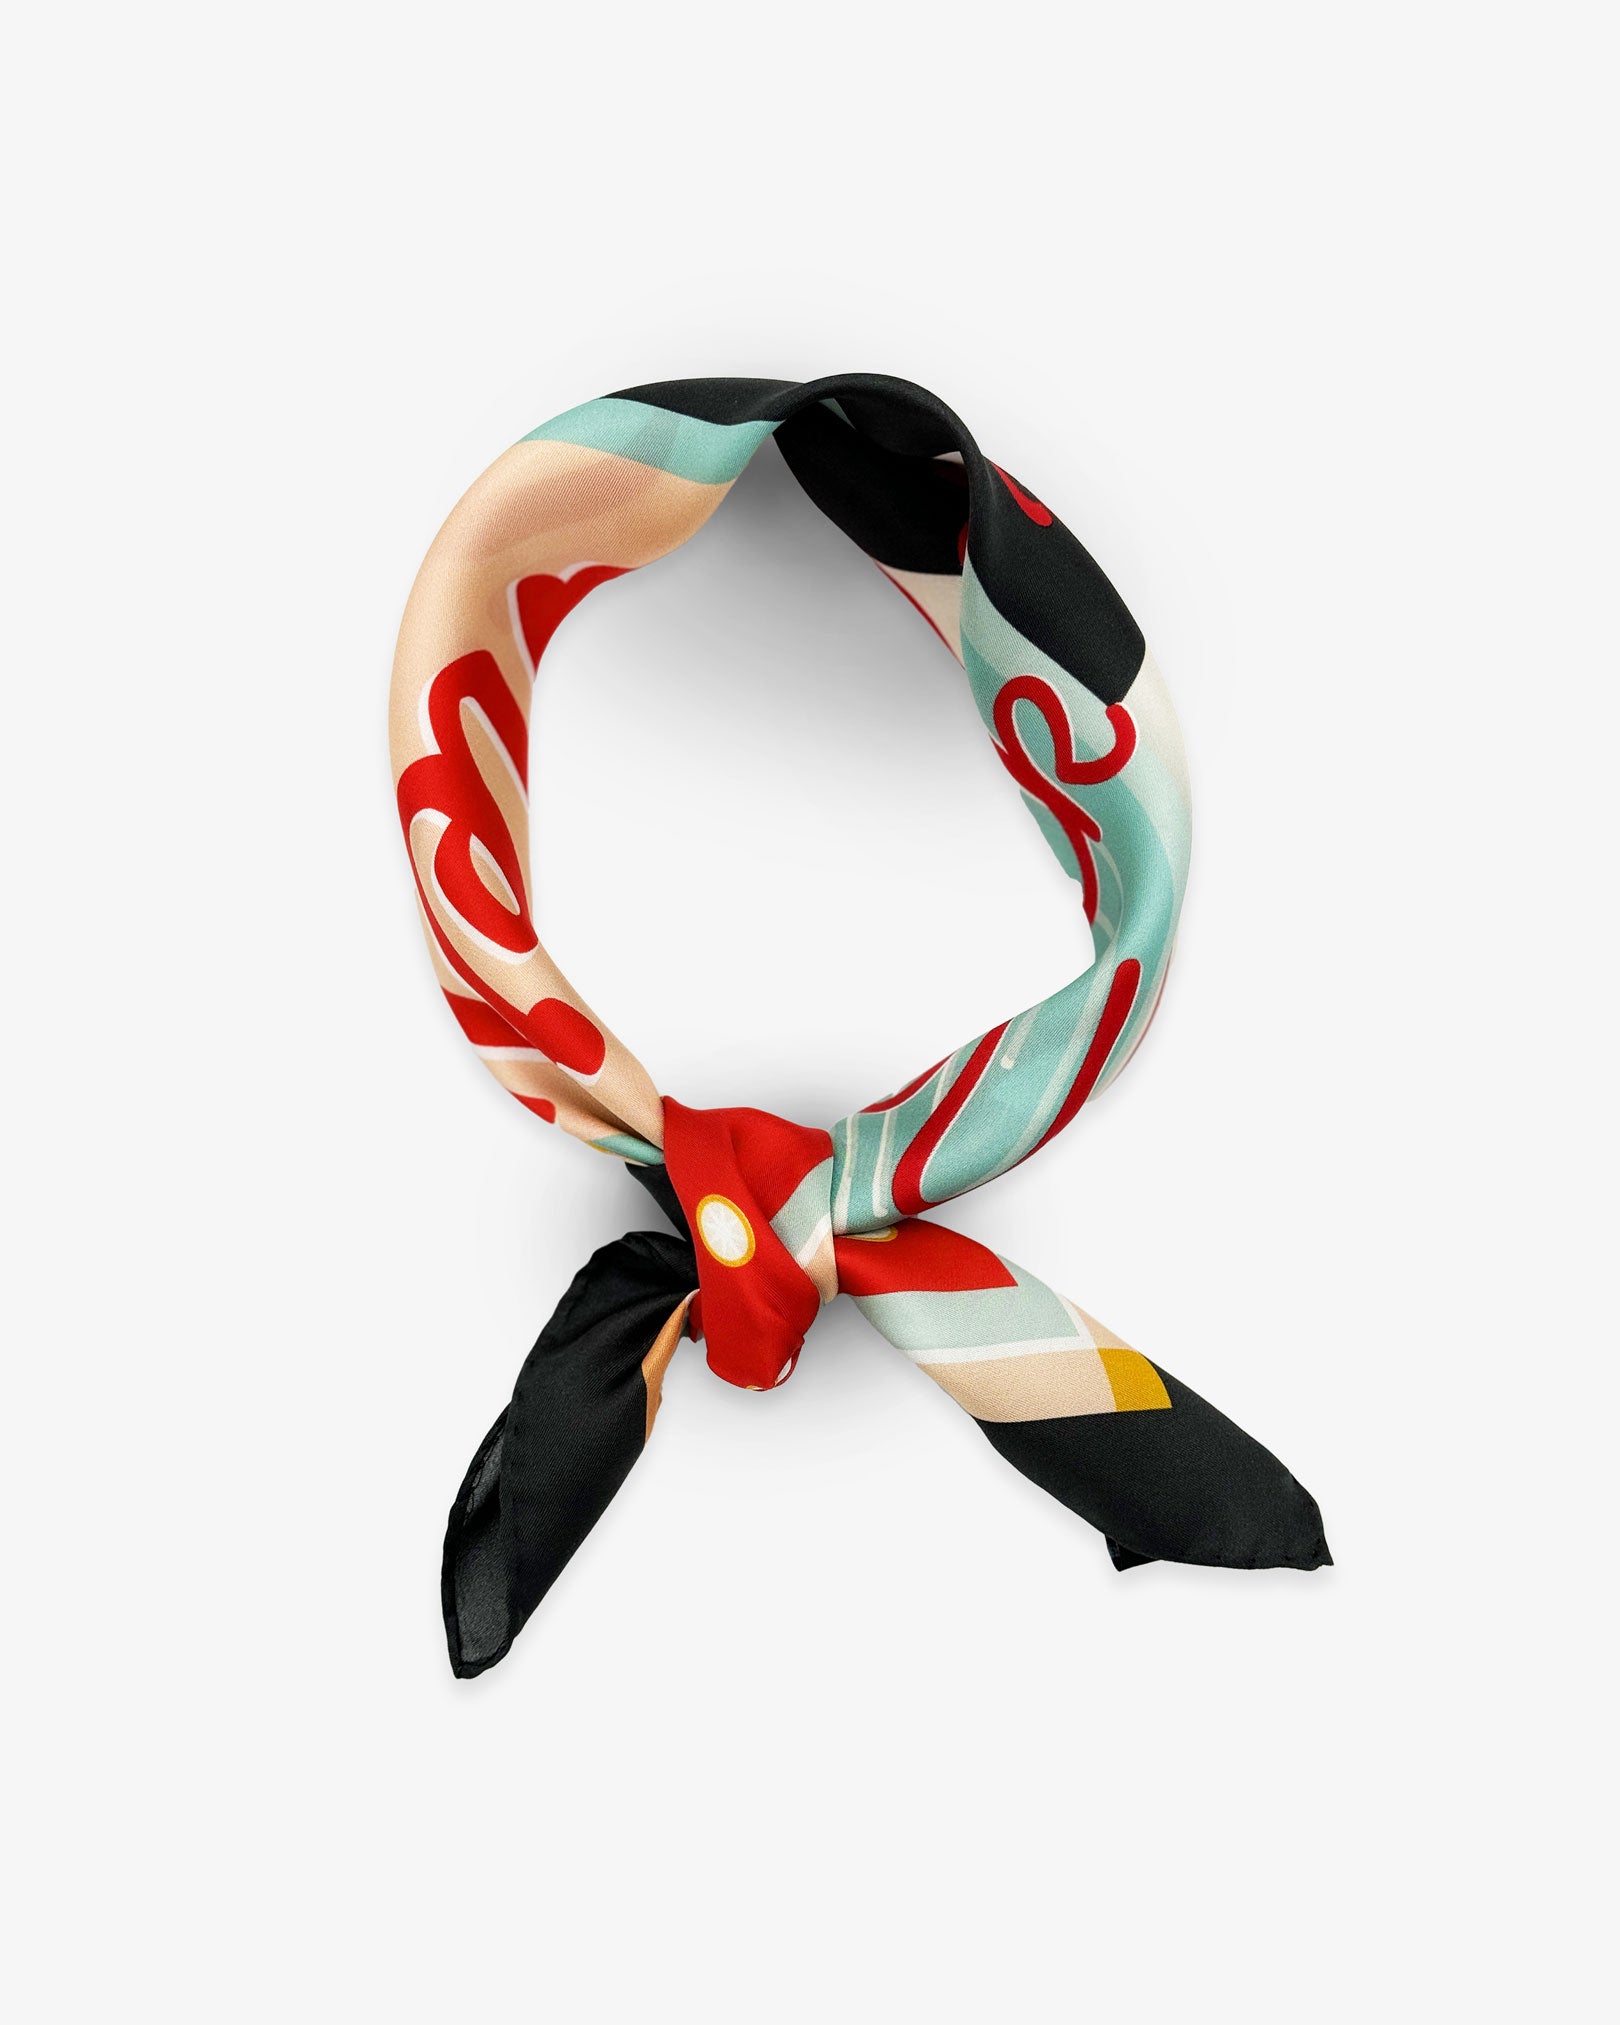 The 'Milkshake' on charcoal silk neckerchief from SOHO Scarves knotted and looped against a white background.